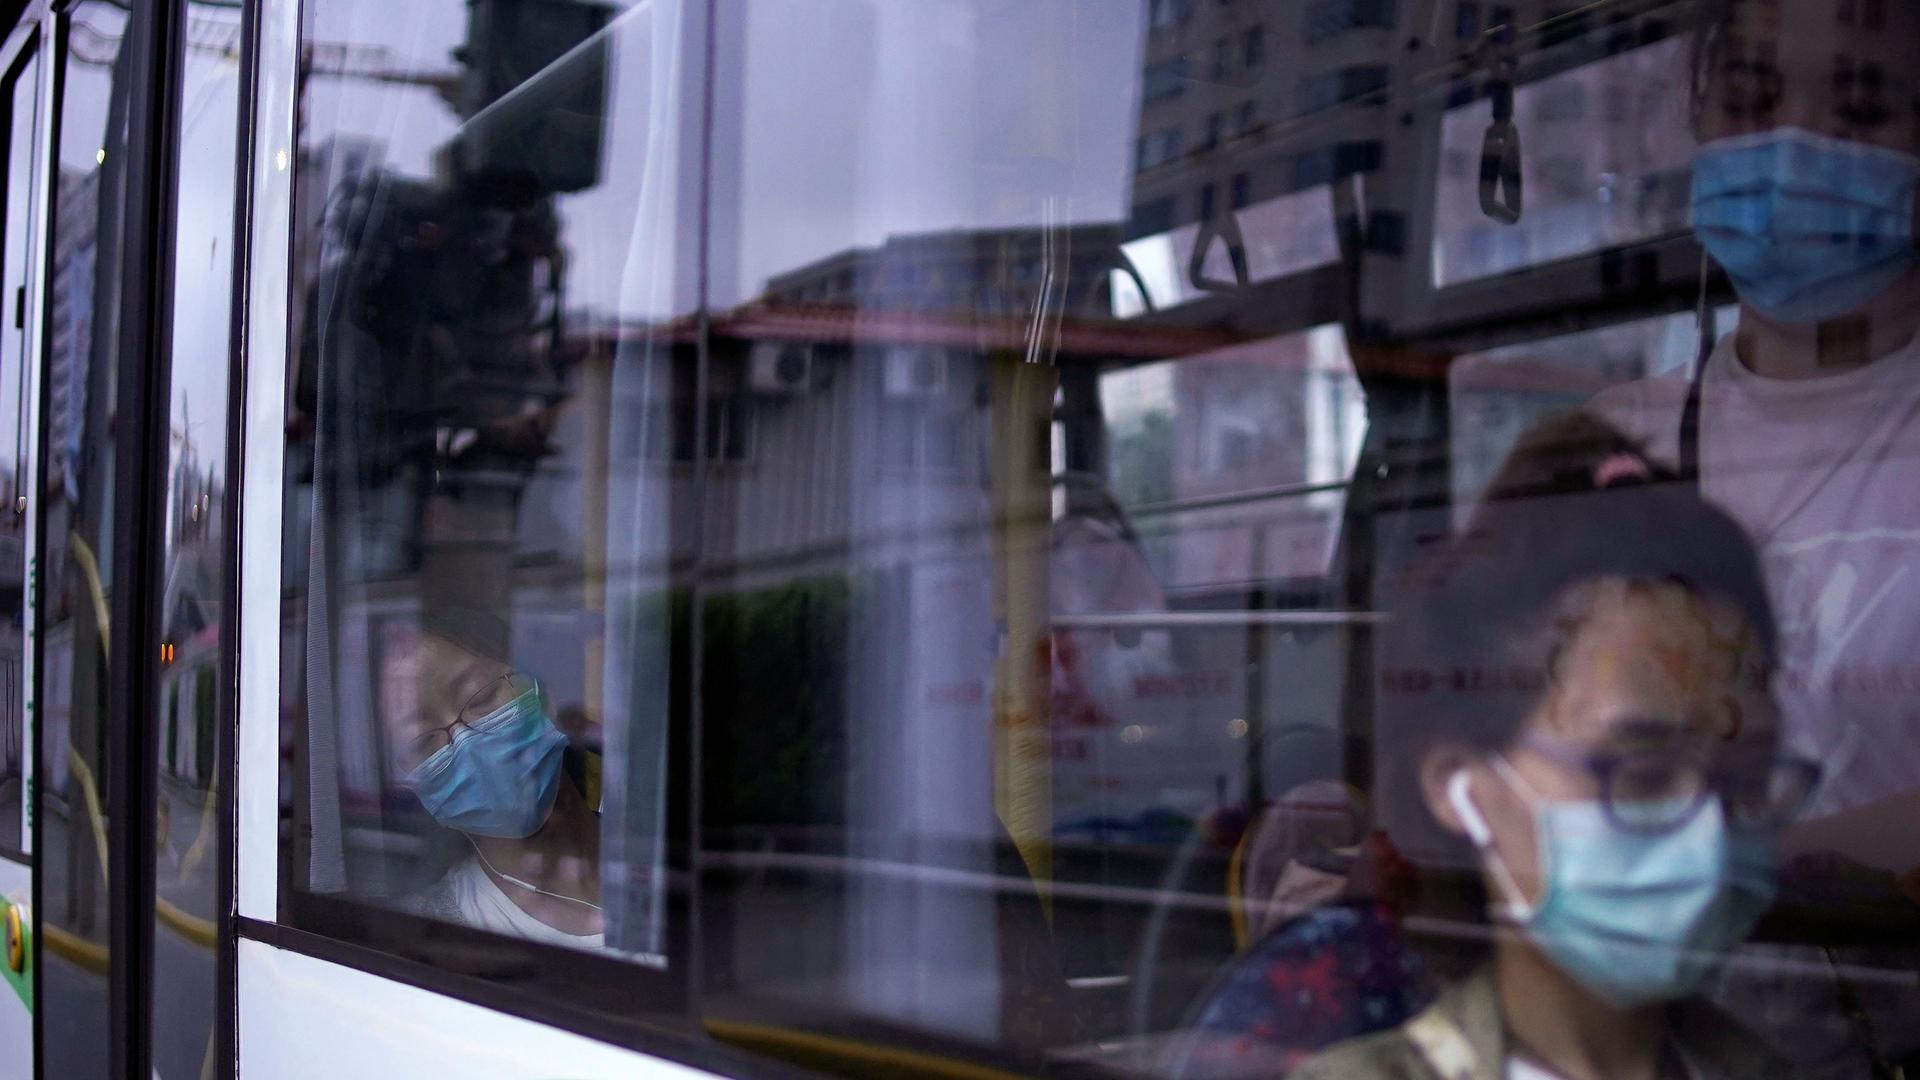 Women wearing protective face masks are seen in a bus, following the coronavirus disease (COVID-19) outbreak, in Shanghai, June 9, 2020. 